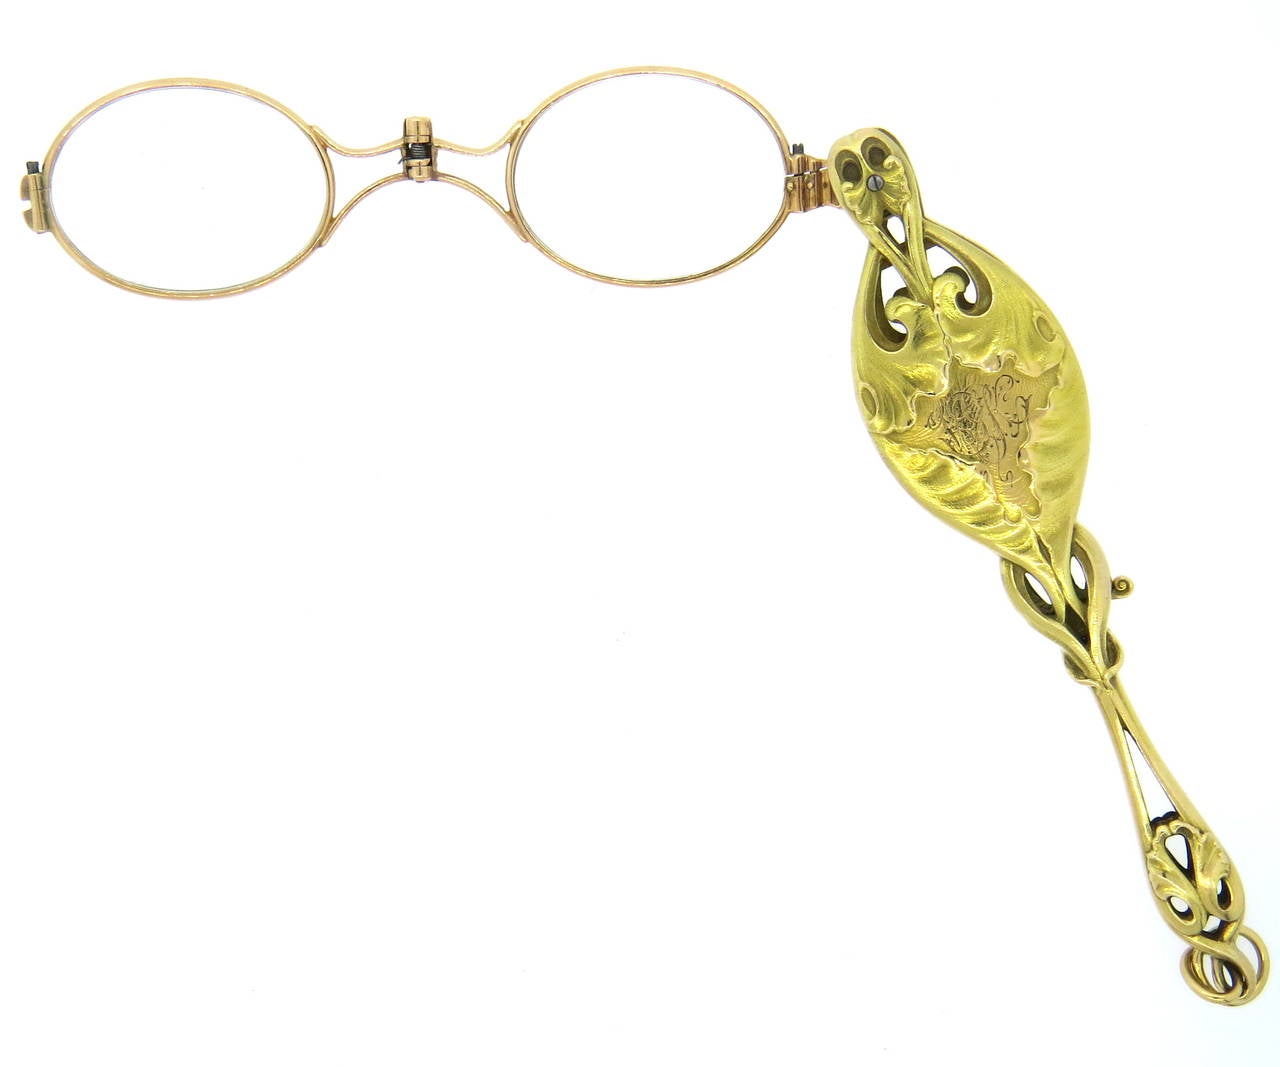 Art Nouveau 14k gold lorgnette, decorated with approximately 0.50ctw in diamonds. Measures 138mm incl. bale x 29mm. Weight of the piece - 60.6gr